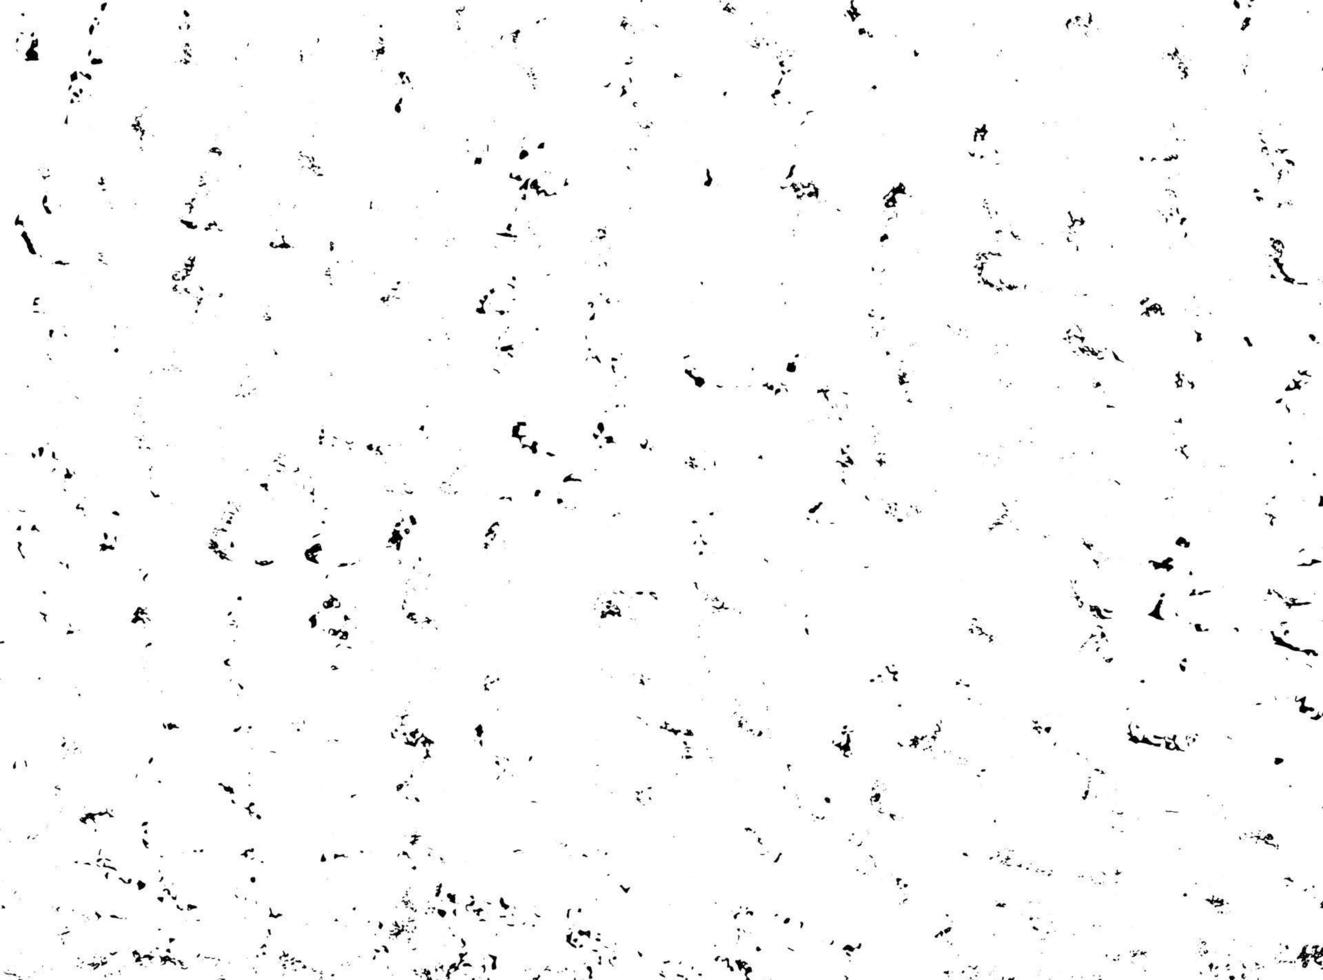 Cracked grunge urban background with rough surface. Dust overlay distress grained texture. One color graphic resource. vector